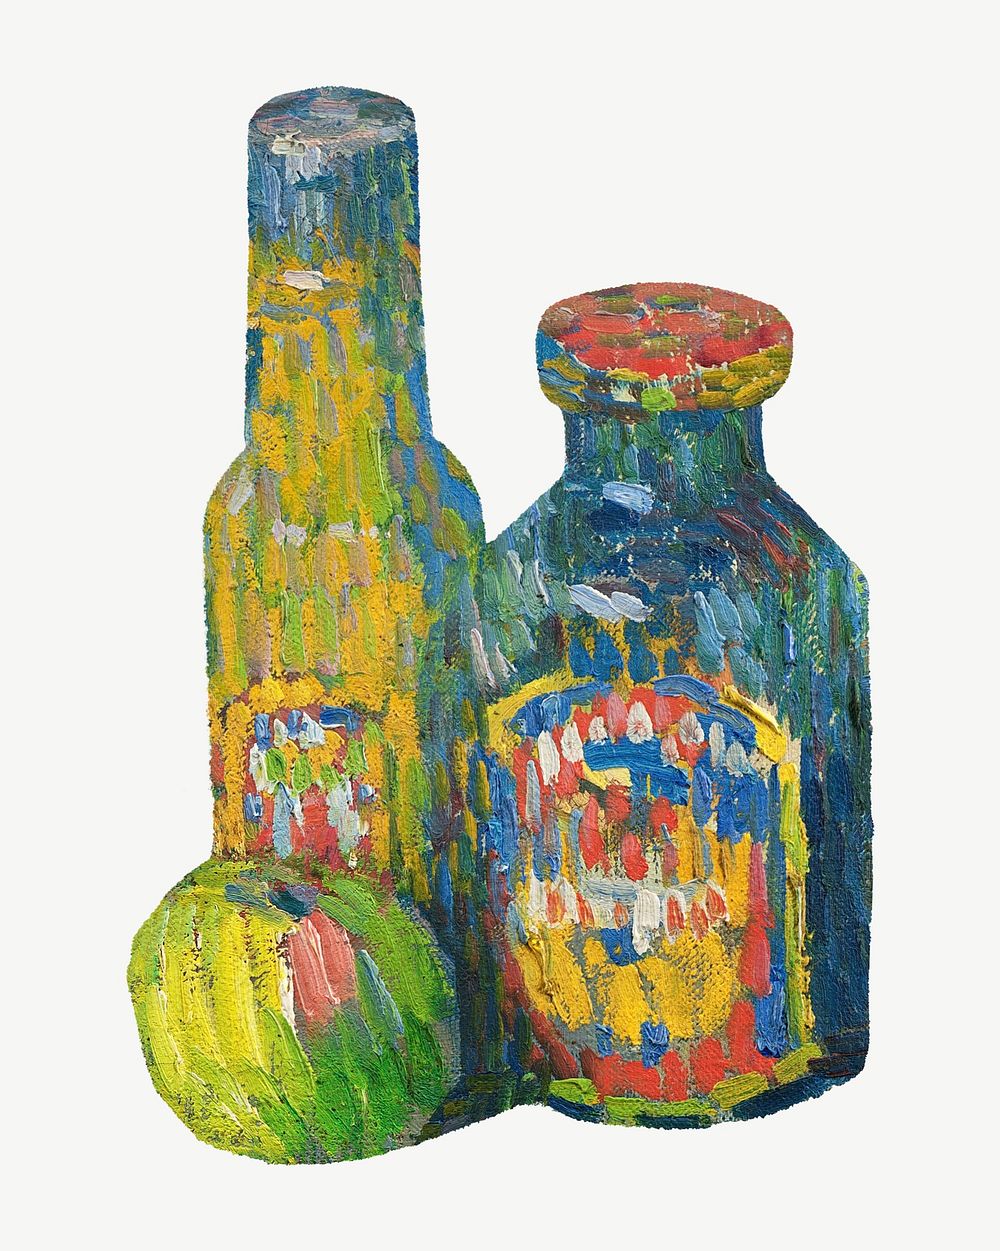 Bottles and Fruit still life, vintage illustration psd by Alexej von Jawlensky.. Remixed by rawpixel.